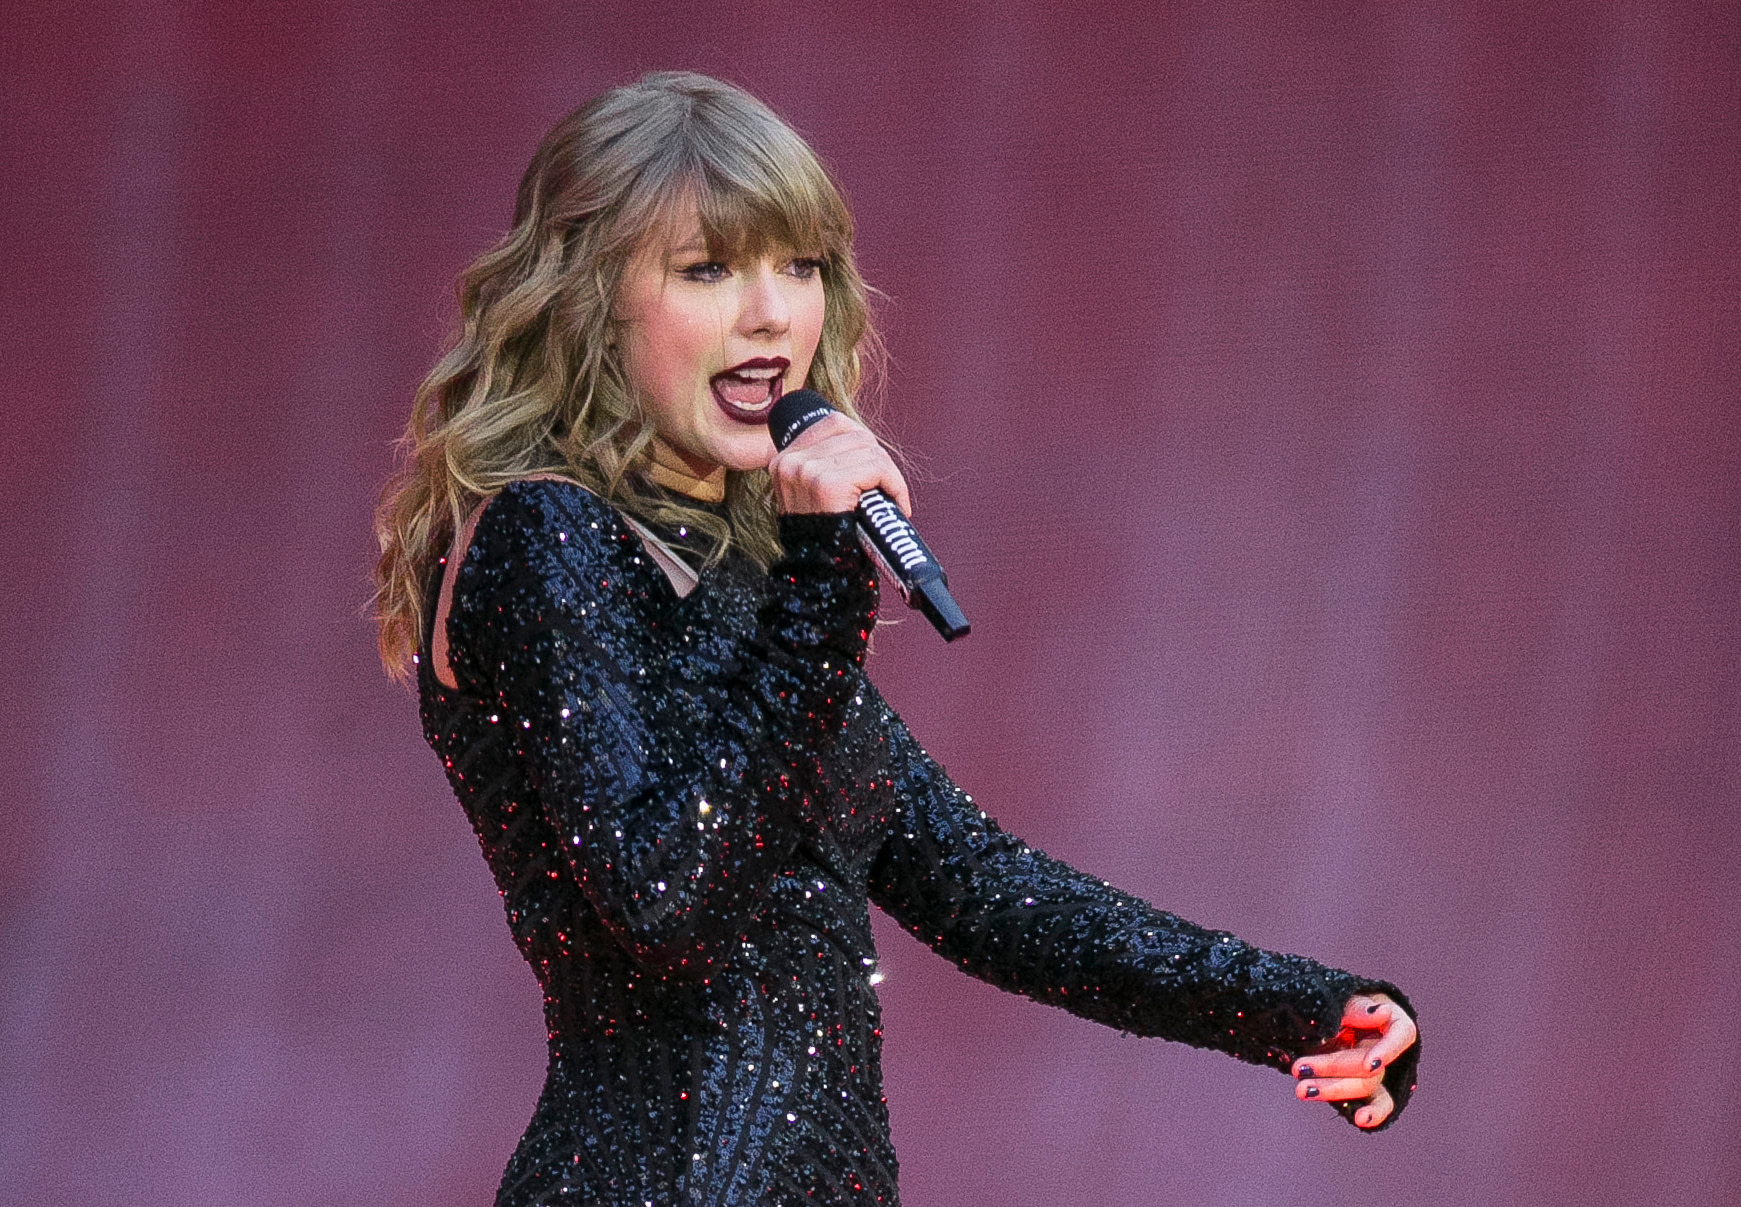 Ticketmaster says cyberattack disrupted Taylor Swift ticket sales